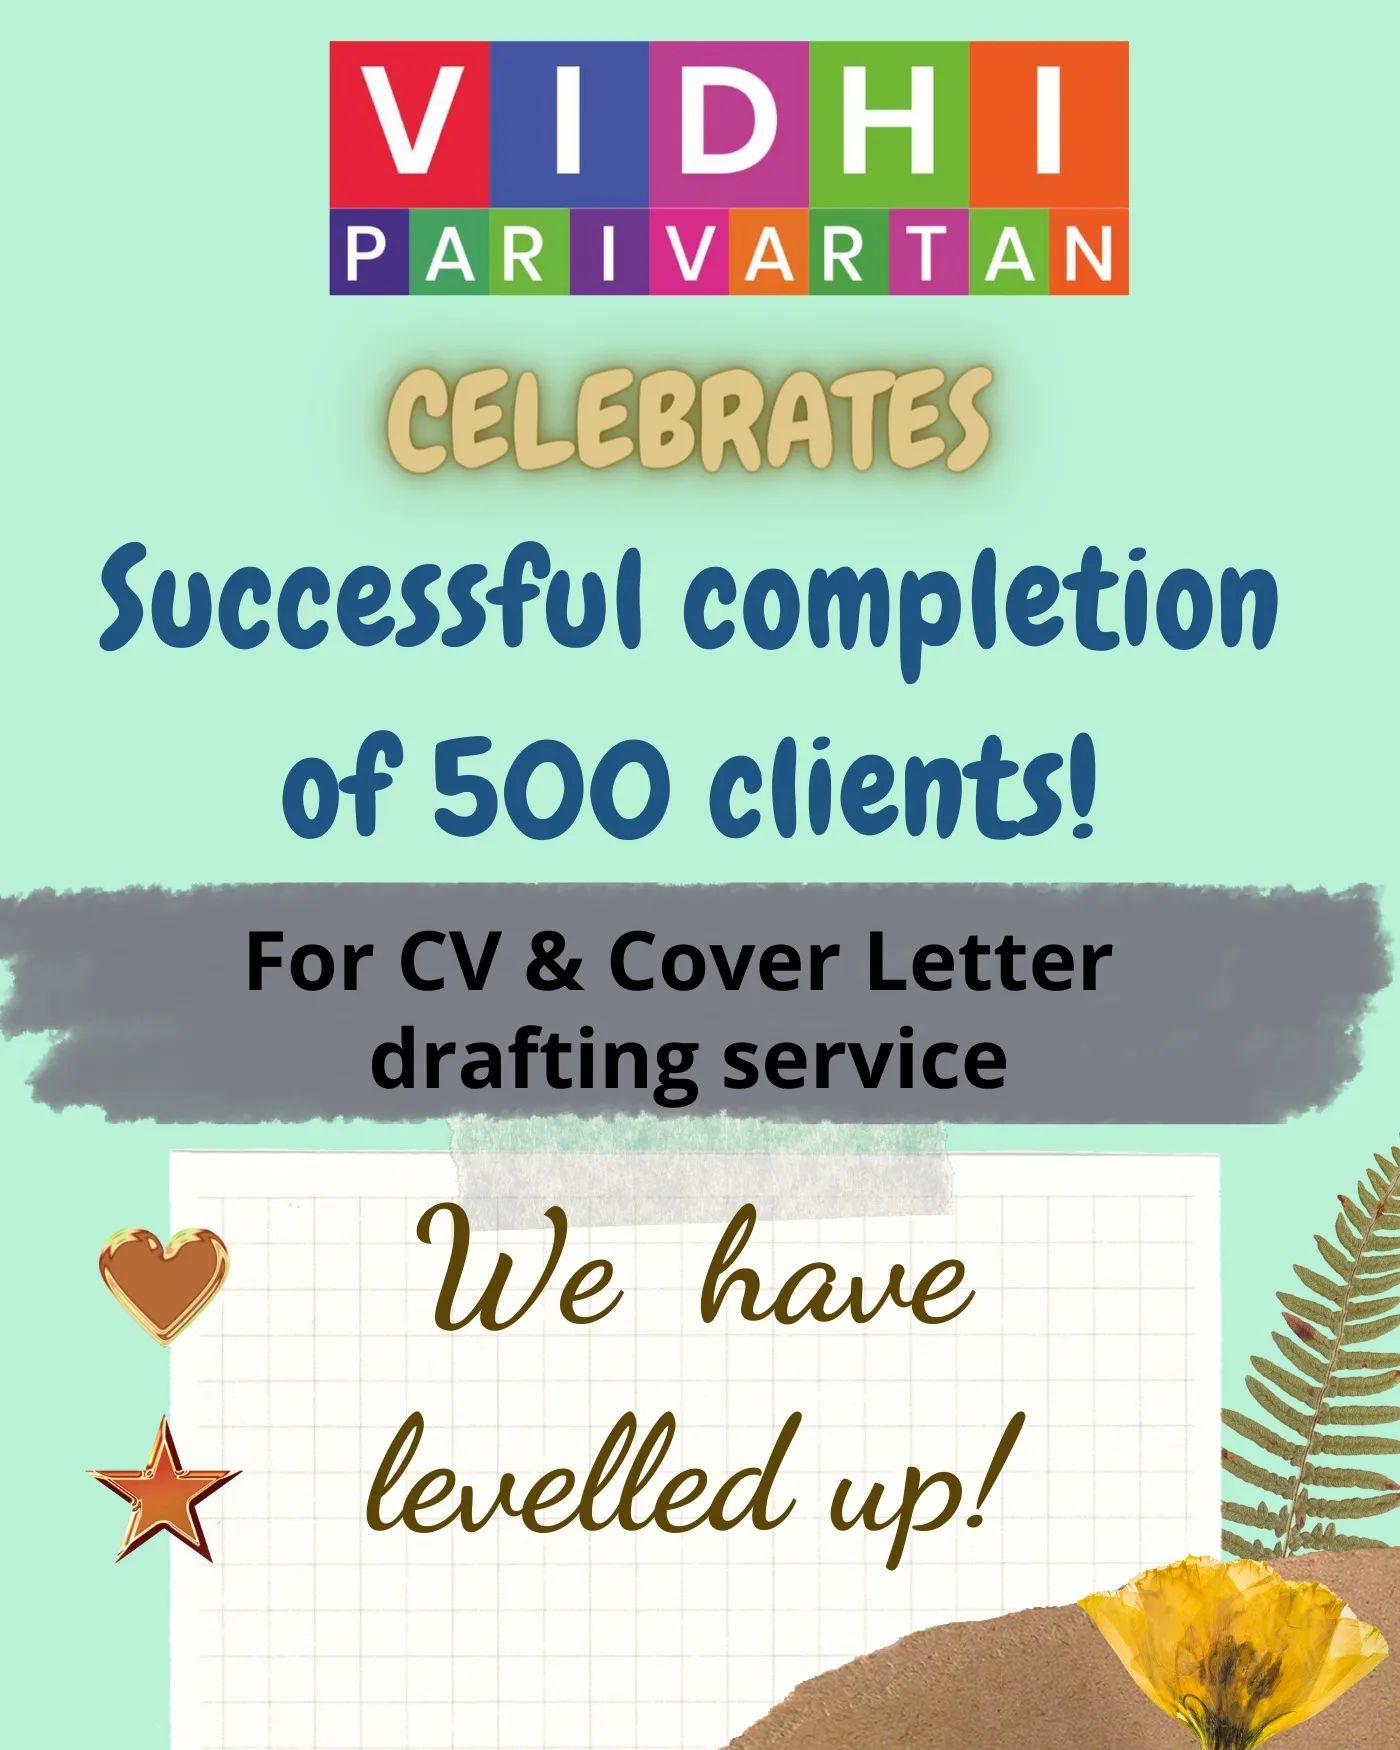 Happy news has arrived! 500 clients have successfully used Vidhi Parivartan's most popular service, the drafting of CVs and cover letters, over the course of 1 year and 8 months.

The statistics also speak for themselves. 

My clients have benefited from this service in the following ways:-

~ 46 of my student clients were successful in landing internships at top-tier firms, 52 at mid-sized law firms, 113 at boutique legal firms, and 23 at reputable chambers;

~ 13 working professionals with 5+ years of experience were able to smoothly switch from litigation to corporate;

~ 9 of my clients who were fresh graduates got themselves placed in top law firms, 5 in mid size firms, and 17 in boutique law firms;

~ Some individuals found it easy to transition from corporate to litigation to freelancing prospects, while others were able to start again with generic internships;

My clients make me very happy, and I am extremely proud of them. Best wishes to you all. And a heartfelt thanks for using my services.

 #experience #litigation #lawfirms #freelancing #internships #freshgraduates #jobs #statistics #legal  #law #career #development #growth #cv #coverletter #drafting #services #availnow